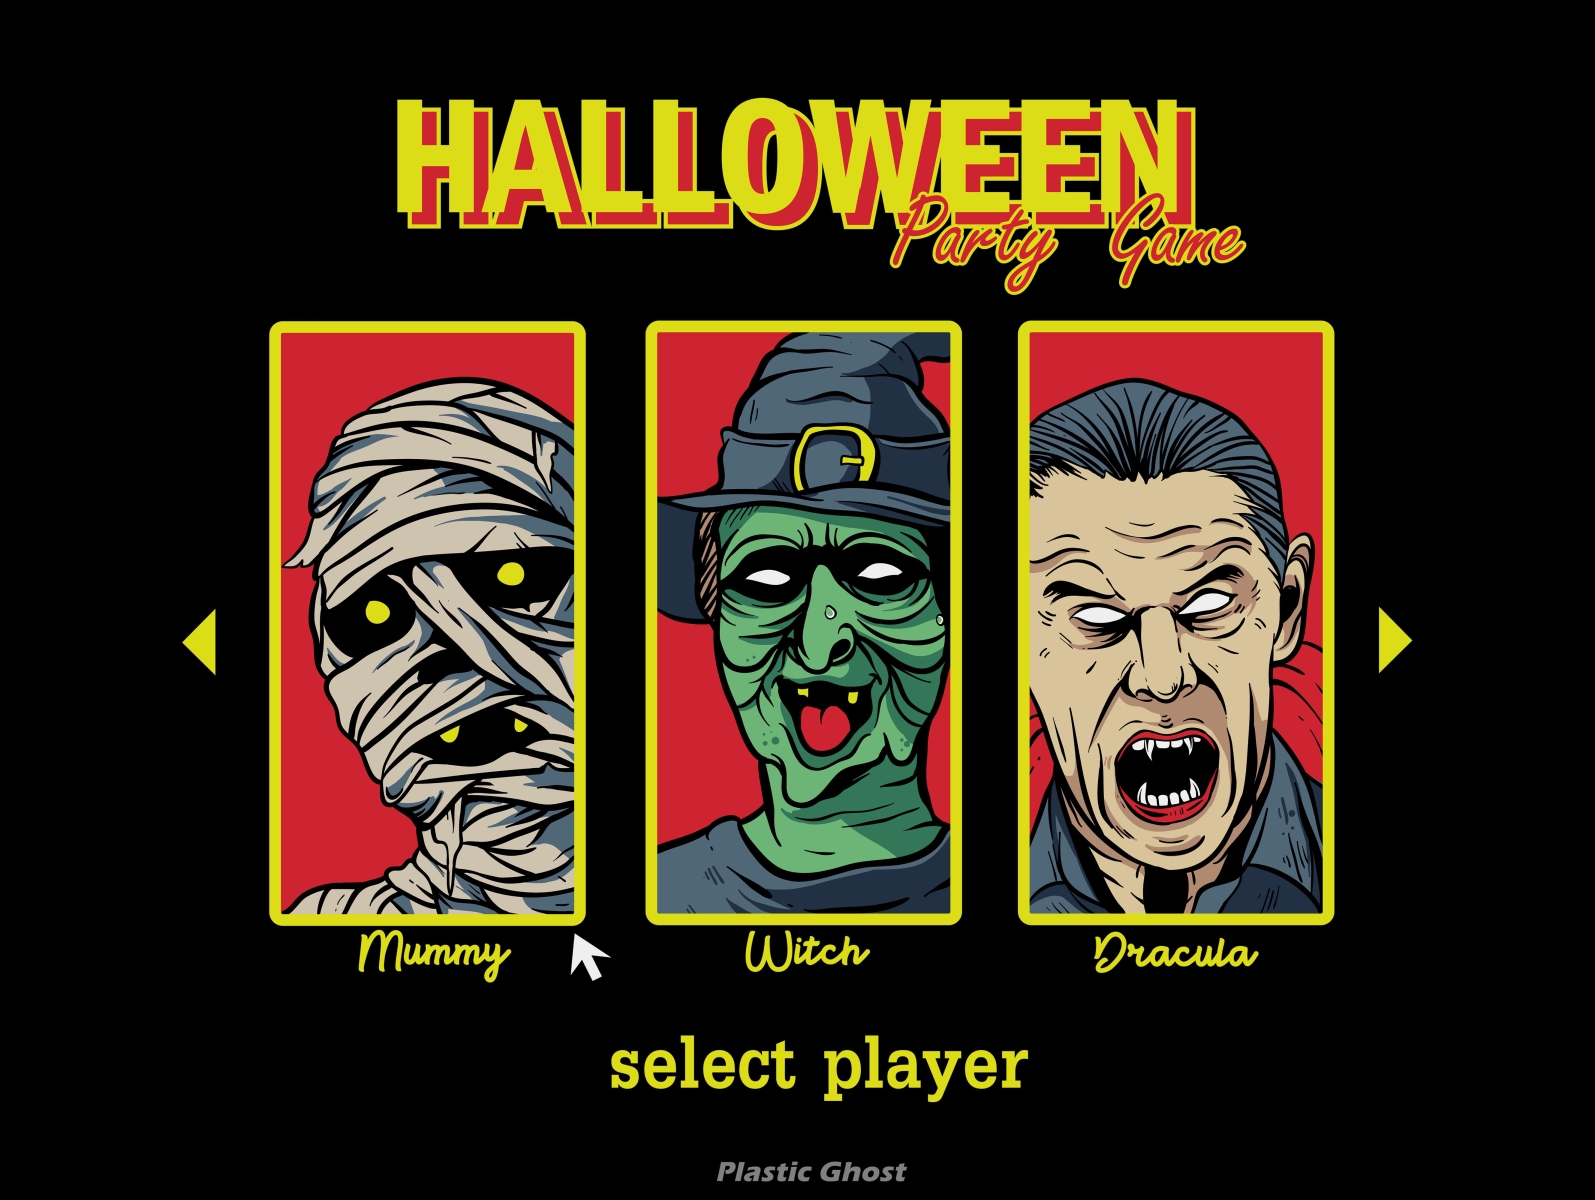 halloween party game by Plastic Ghost on Dribbble